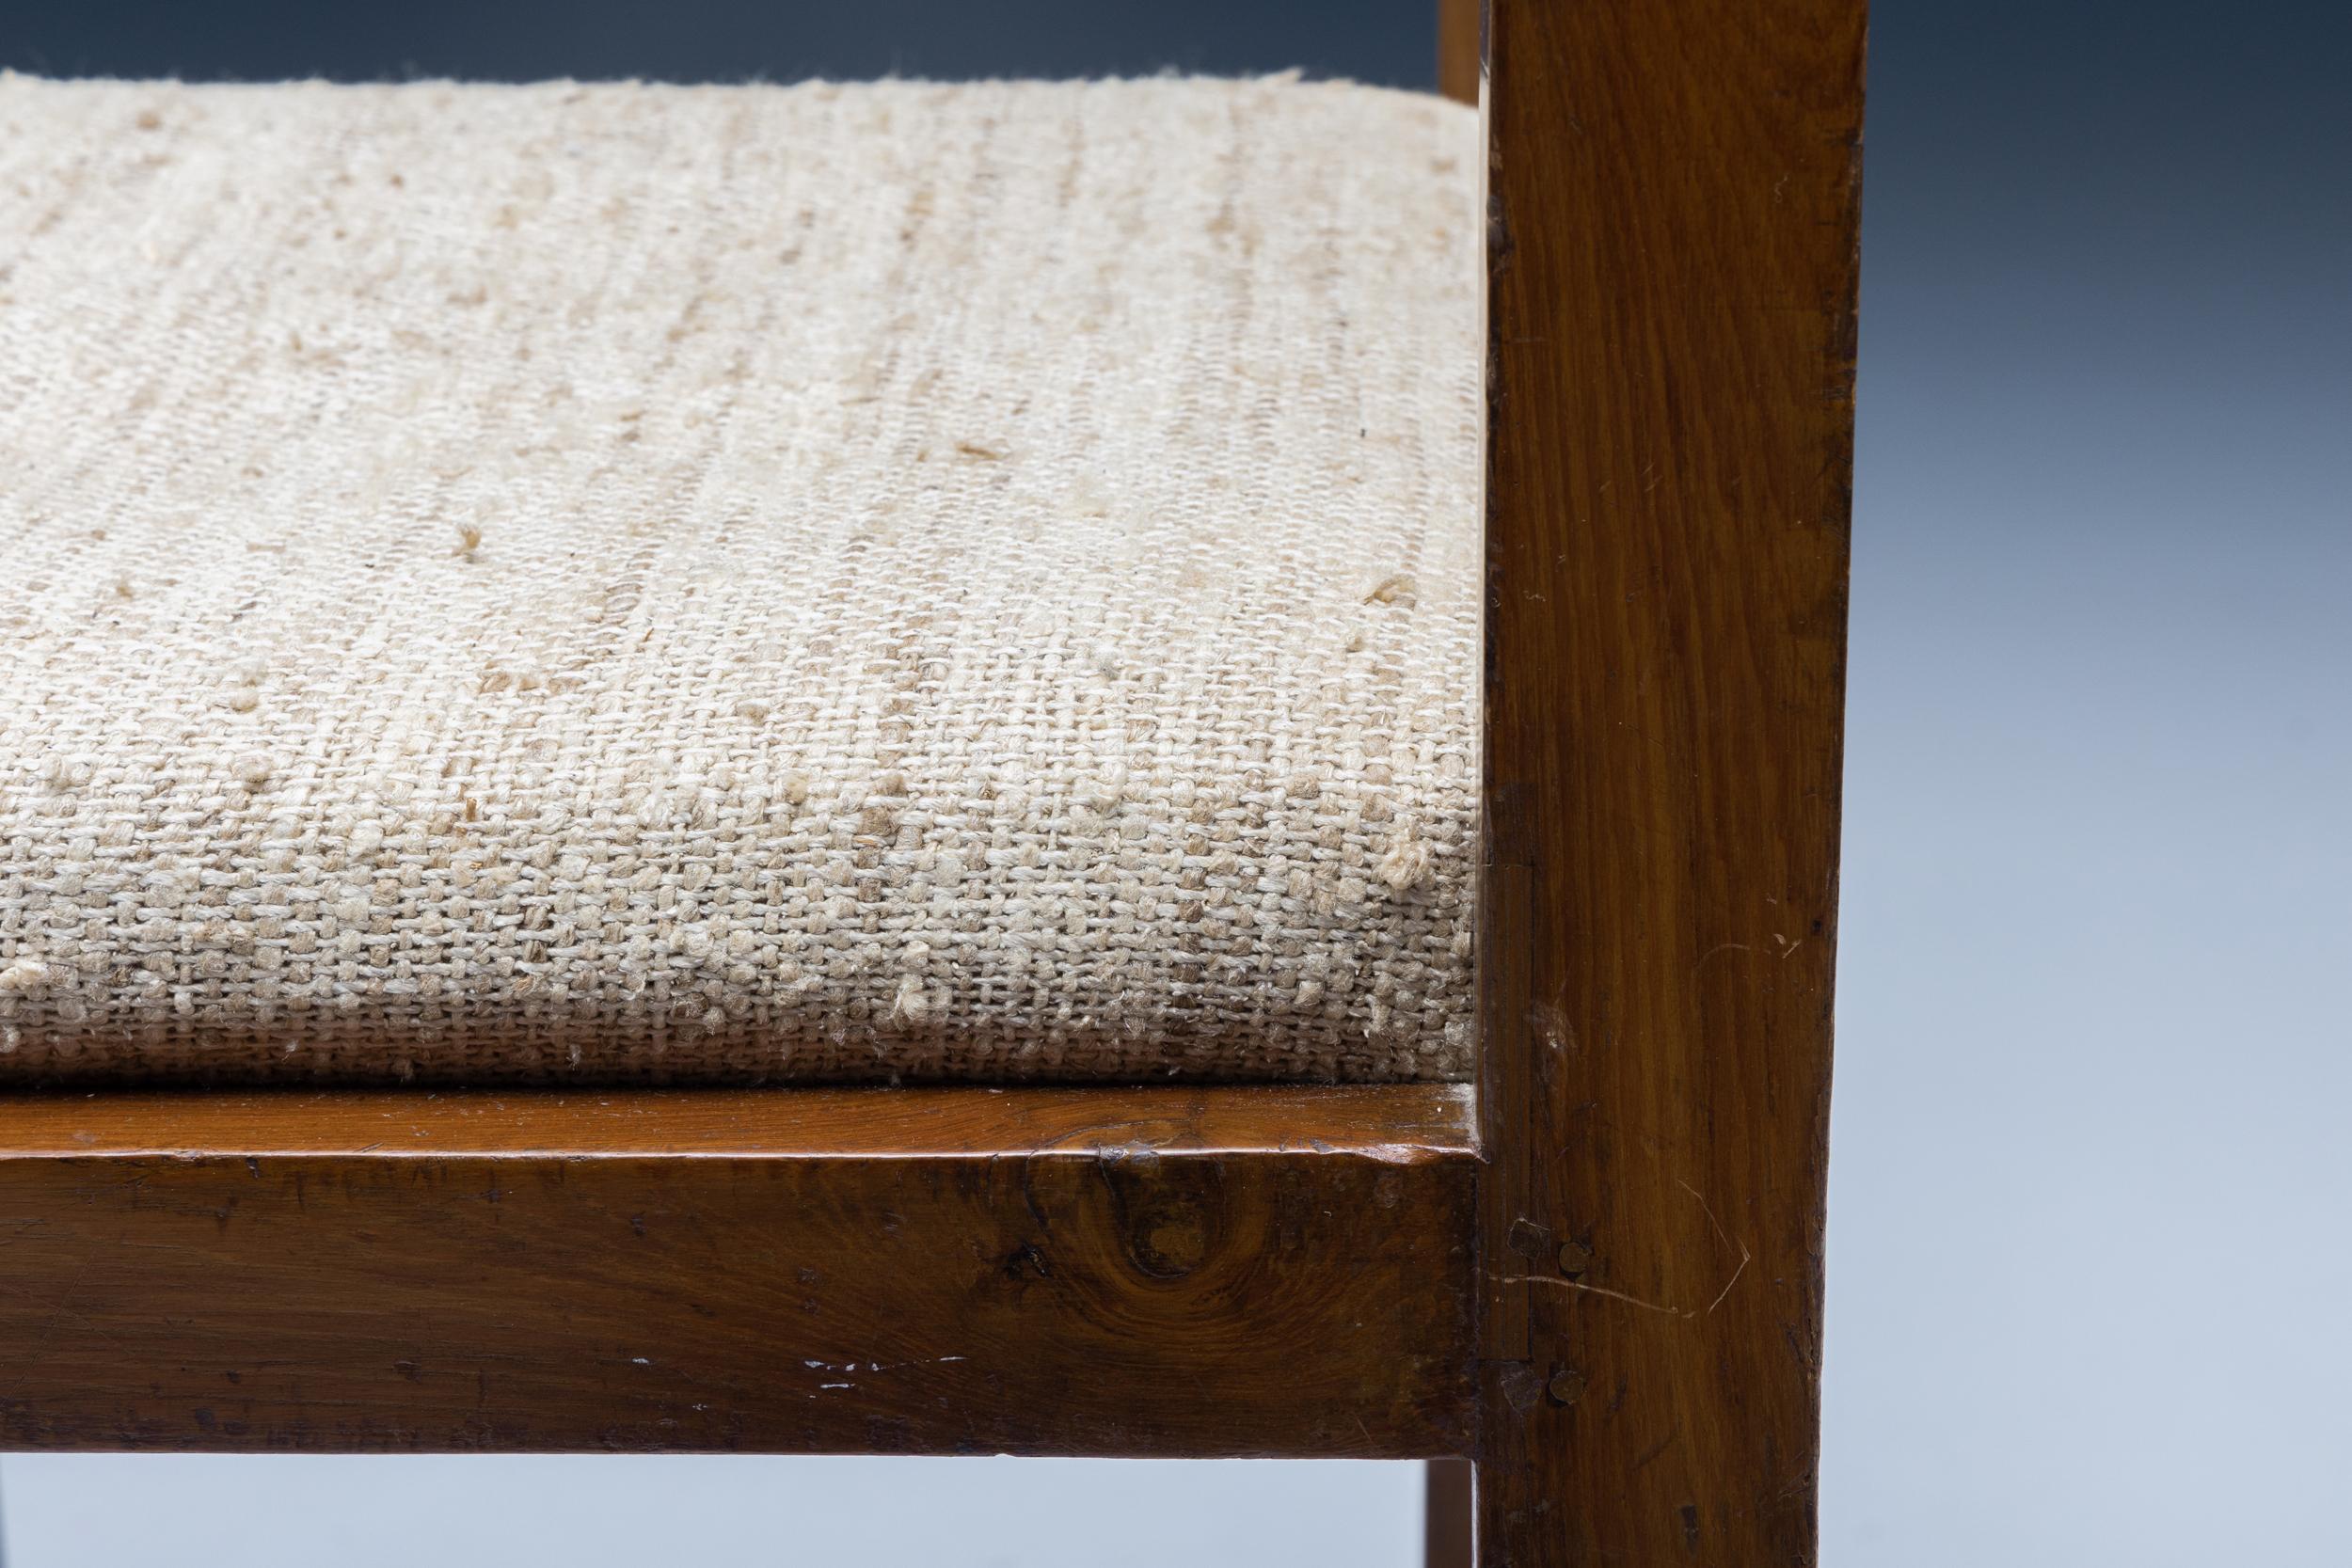 Pierre Jeanneret Chandigarh Prototype Stool, Woven Linen Seating, India, 1960's For Sale 2